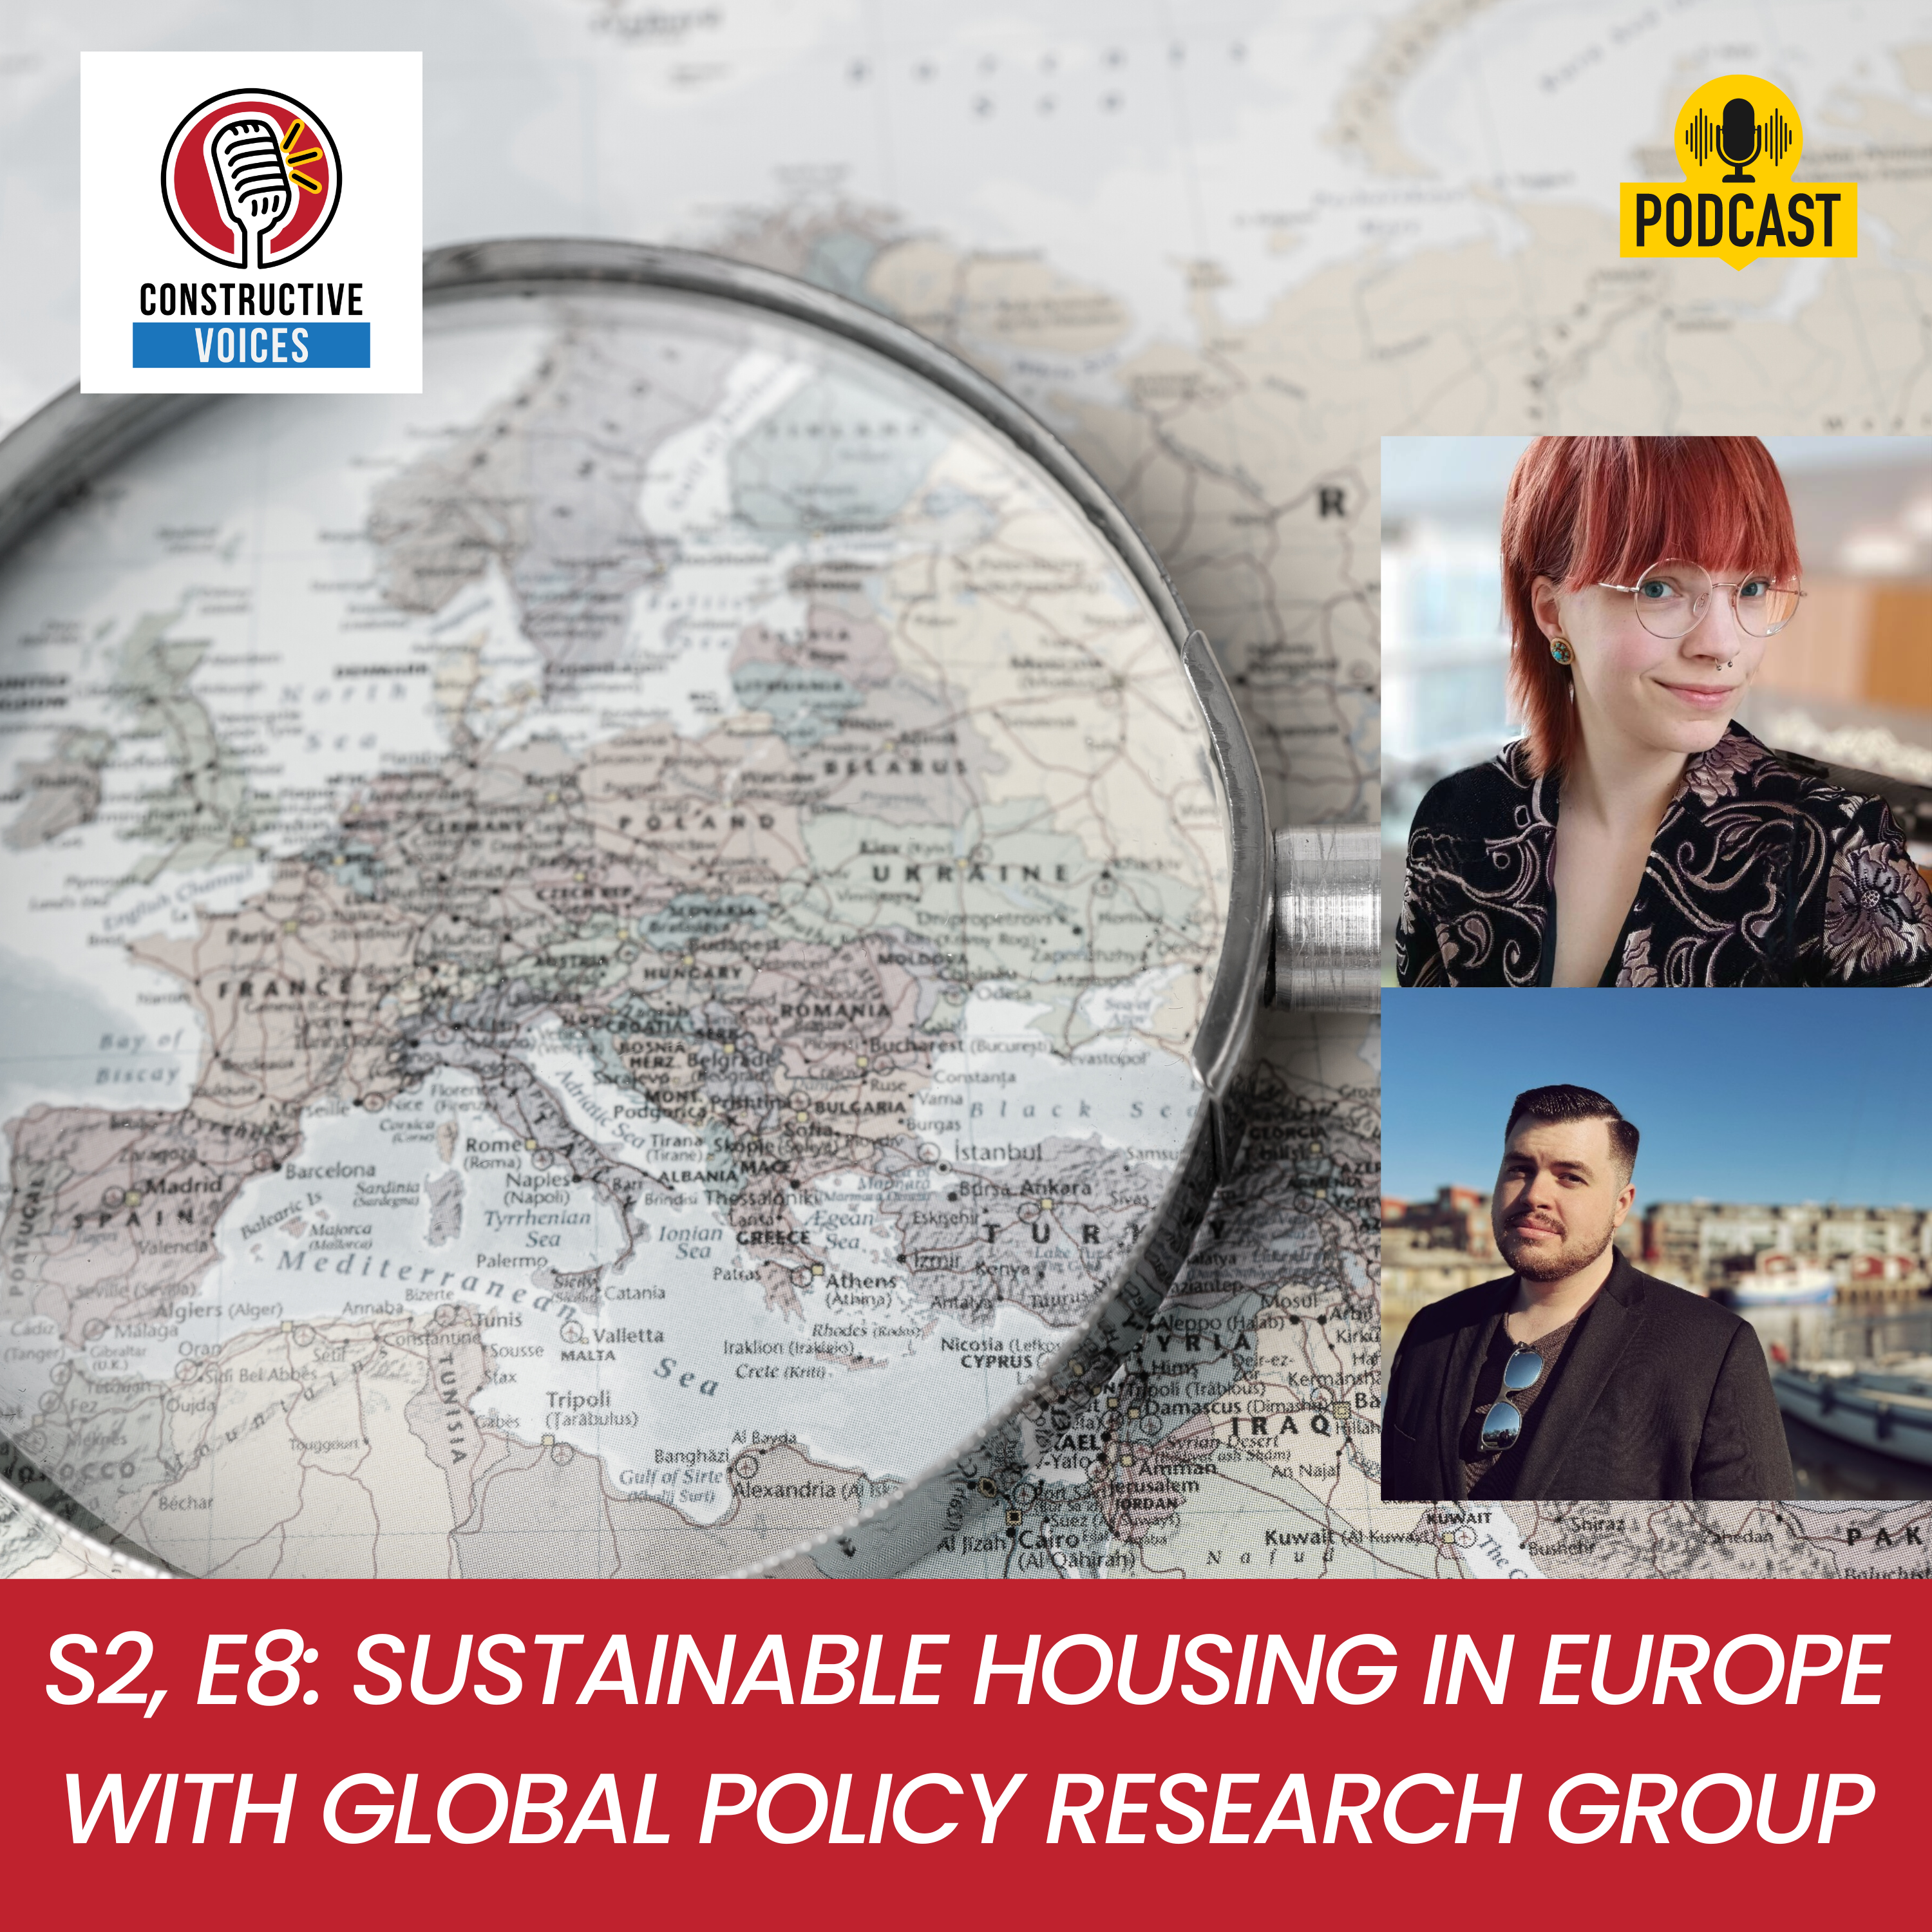 Sustainable Housing In Europe Challenges and Opportunities with the Global Policy Research Group